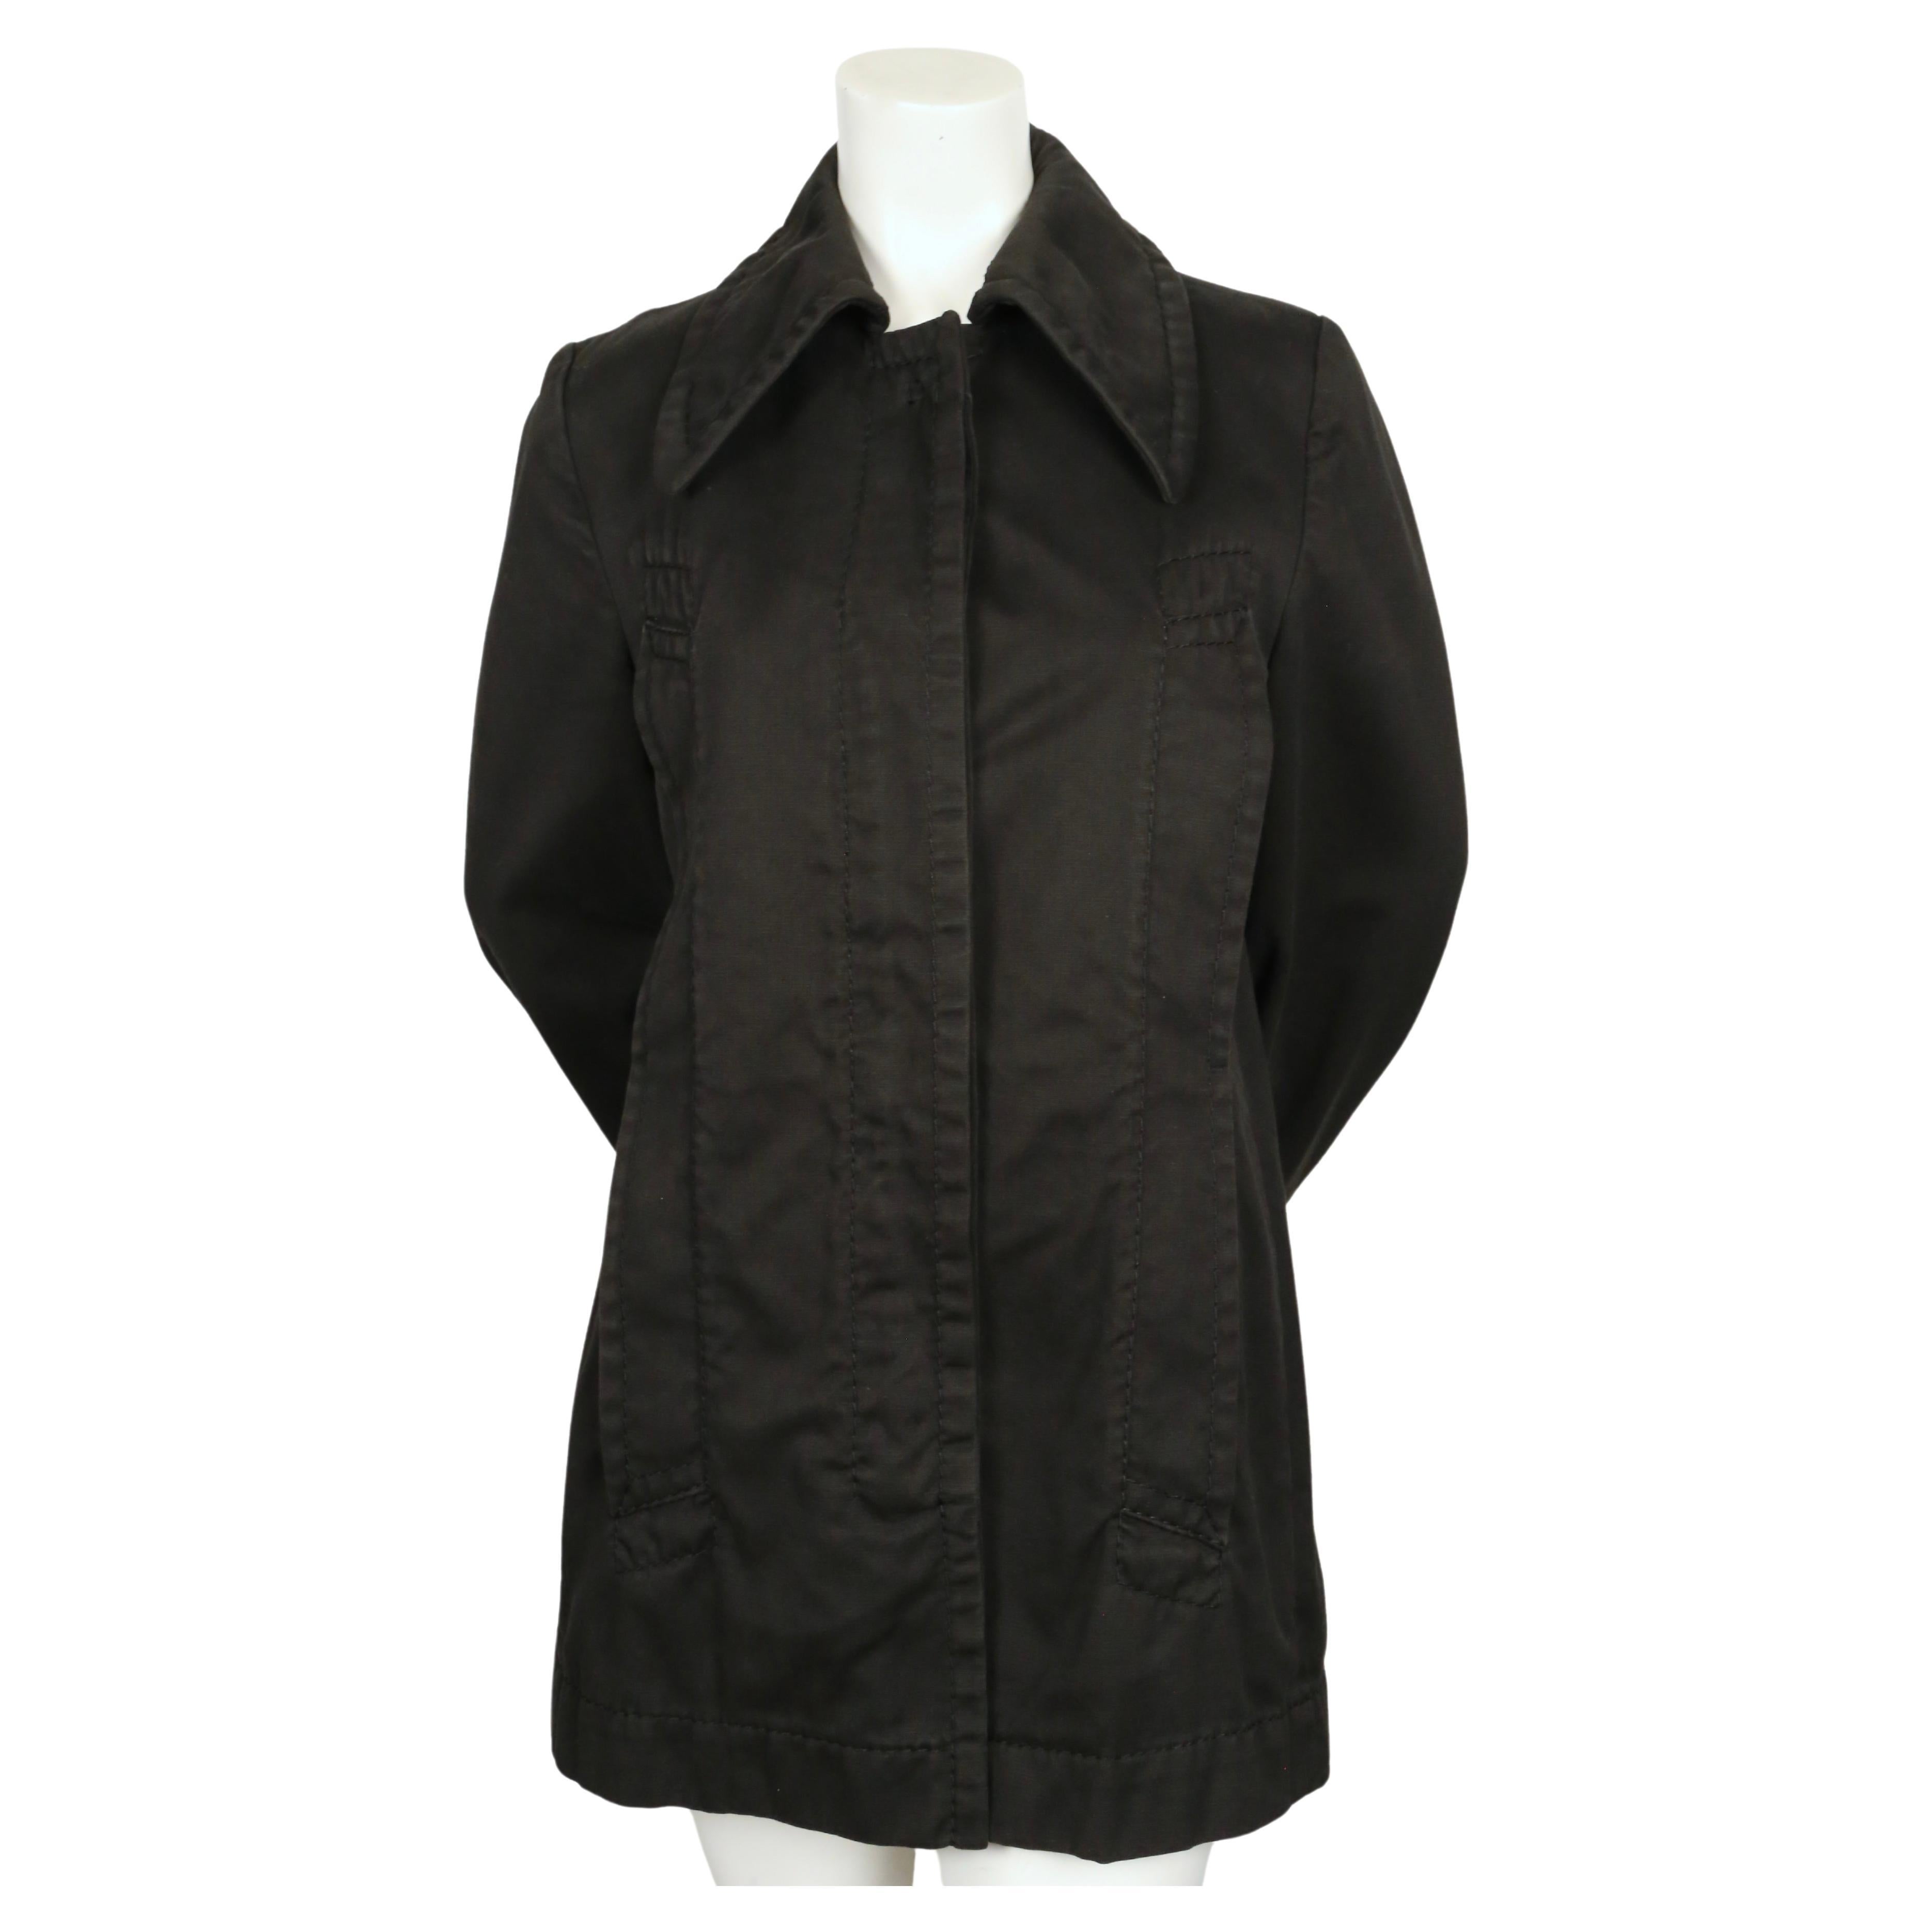 Black runway coat with oversized collar, elongated pockets and topstitching detail designed by Martin Margiela as seen on the fall 1996 runway. Labeled an Italian size 44. Approximate measurements: shoulder 15.5